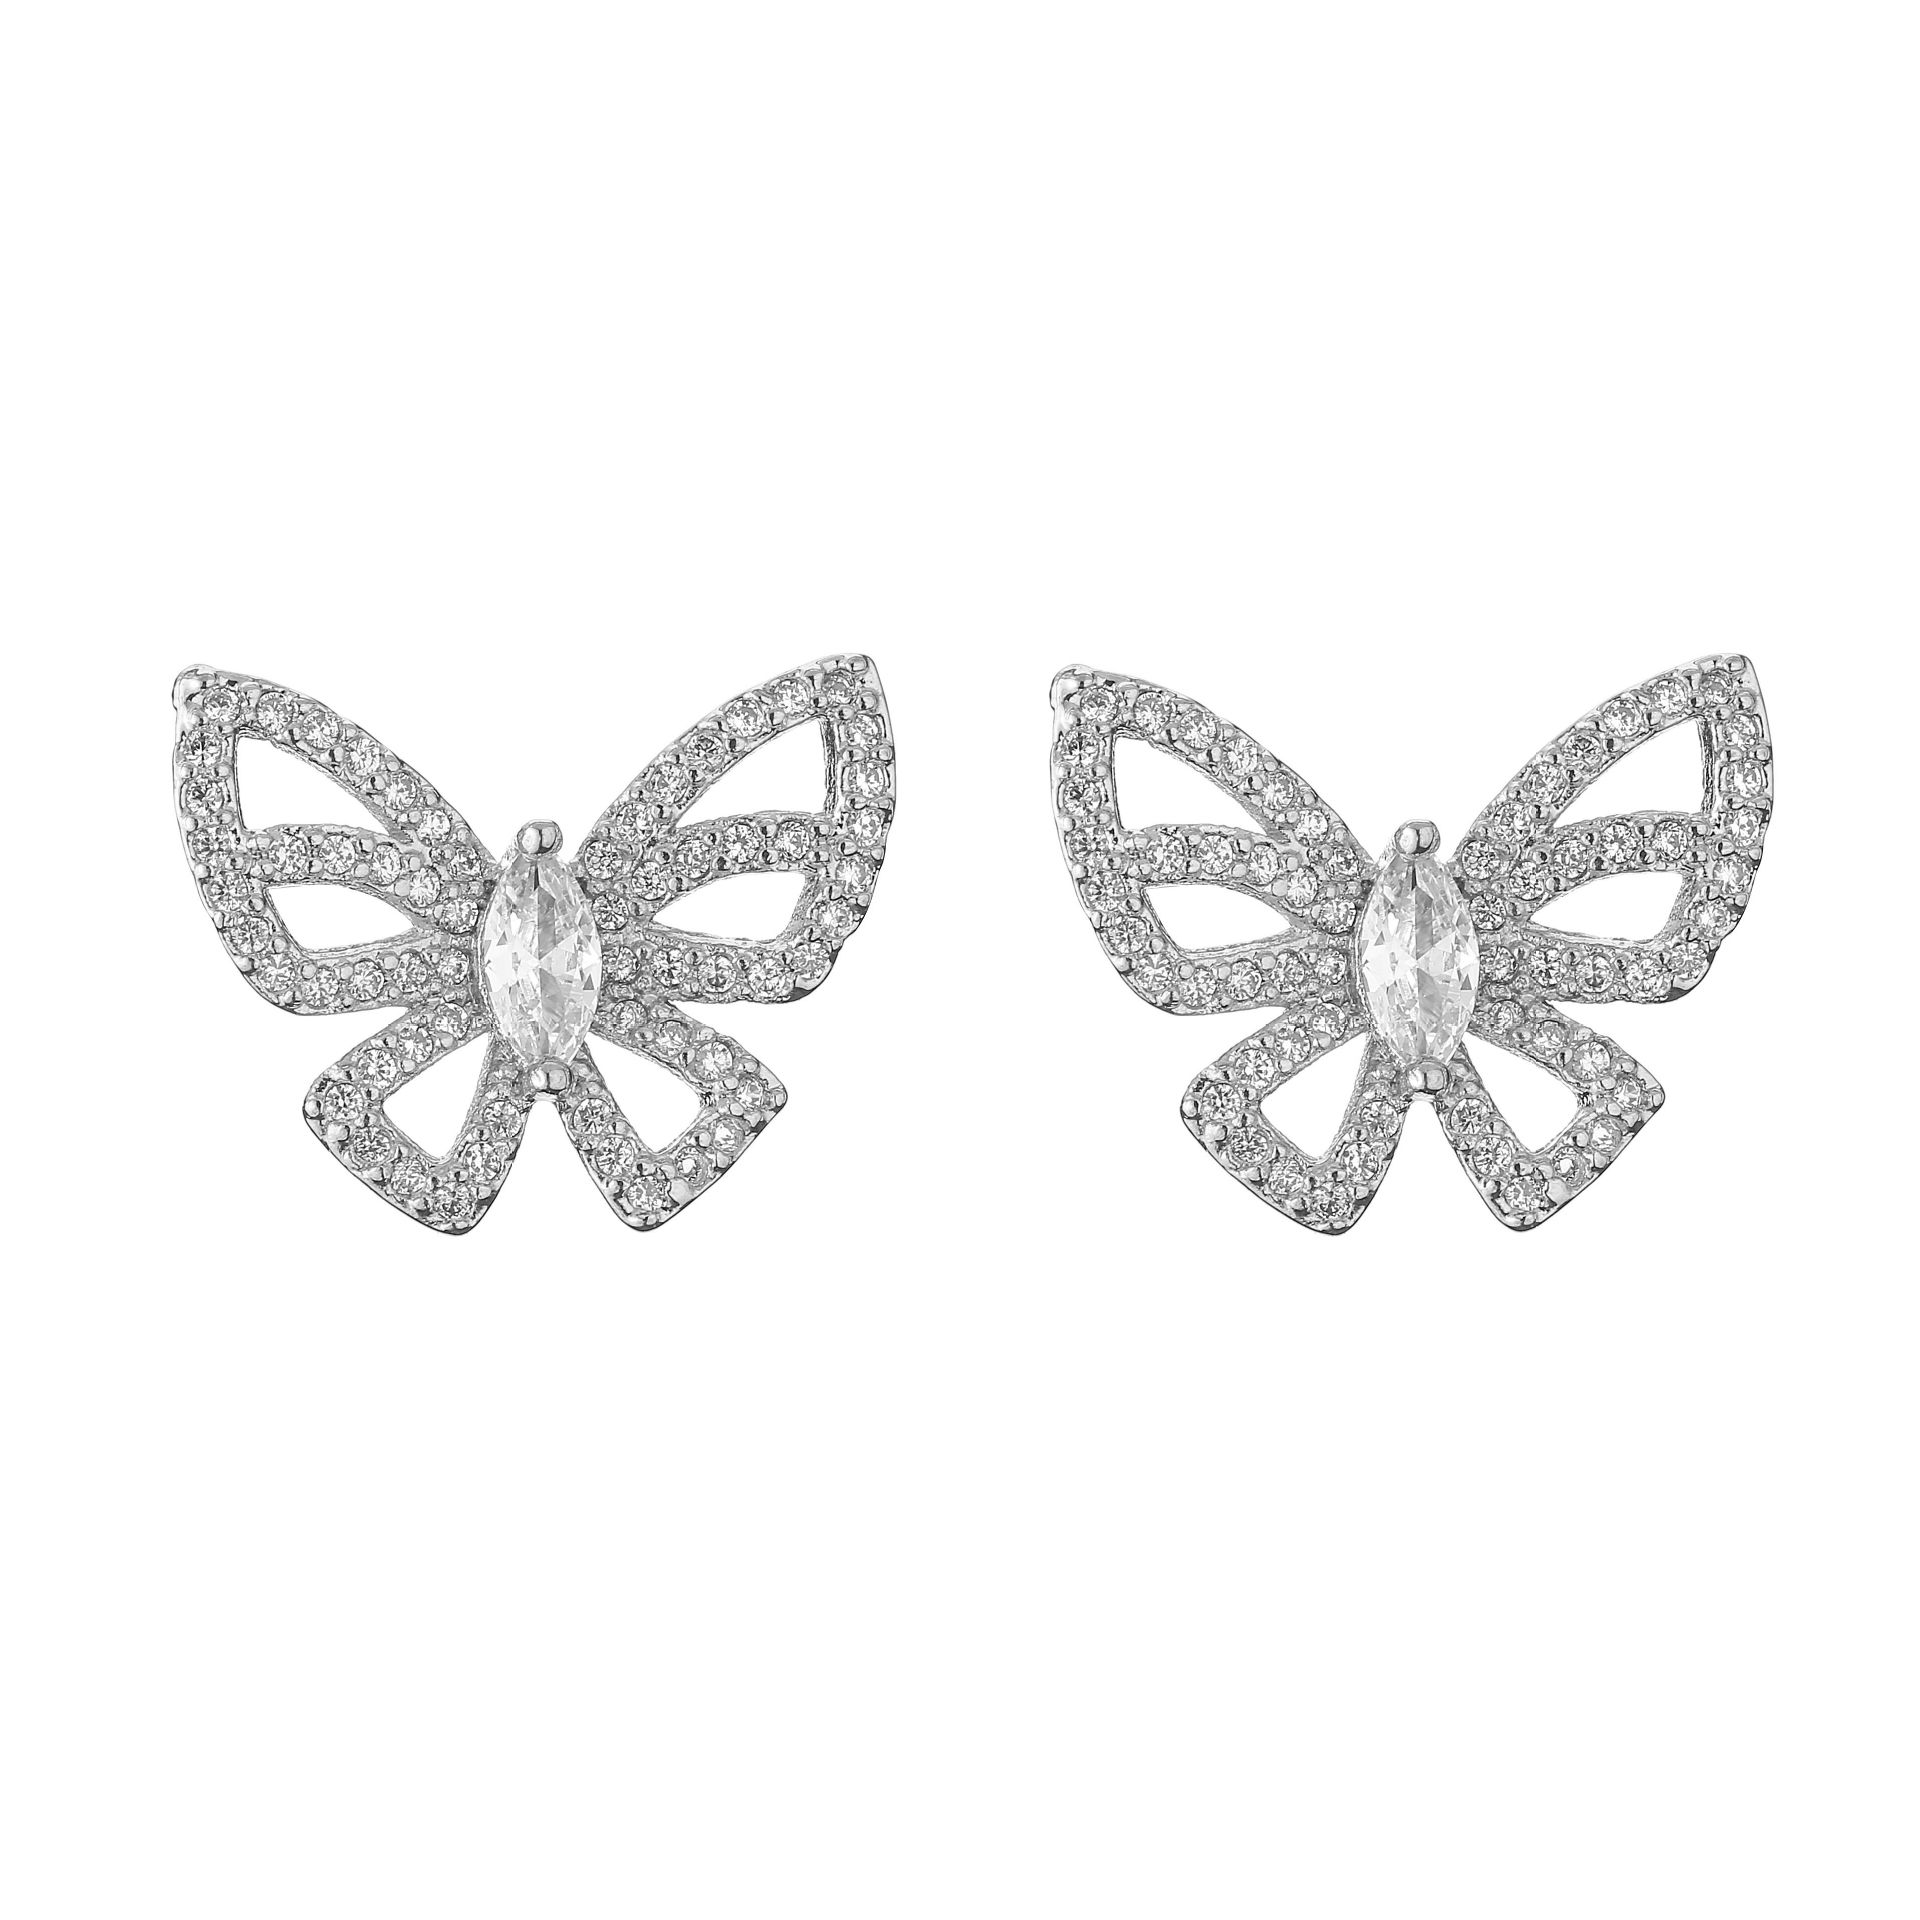 4:White-gold butterfly